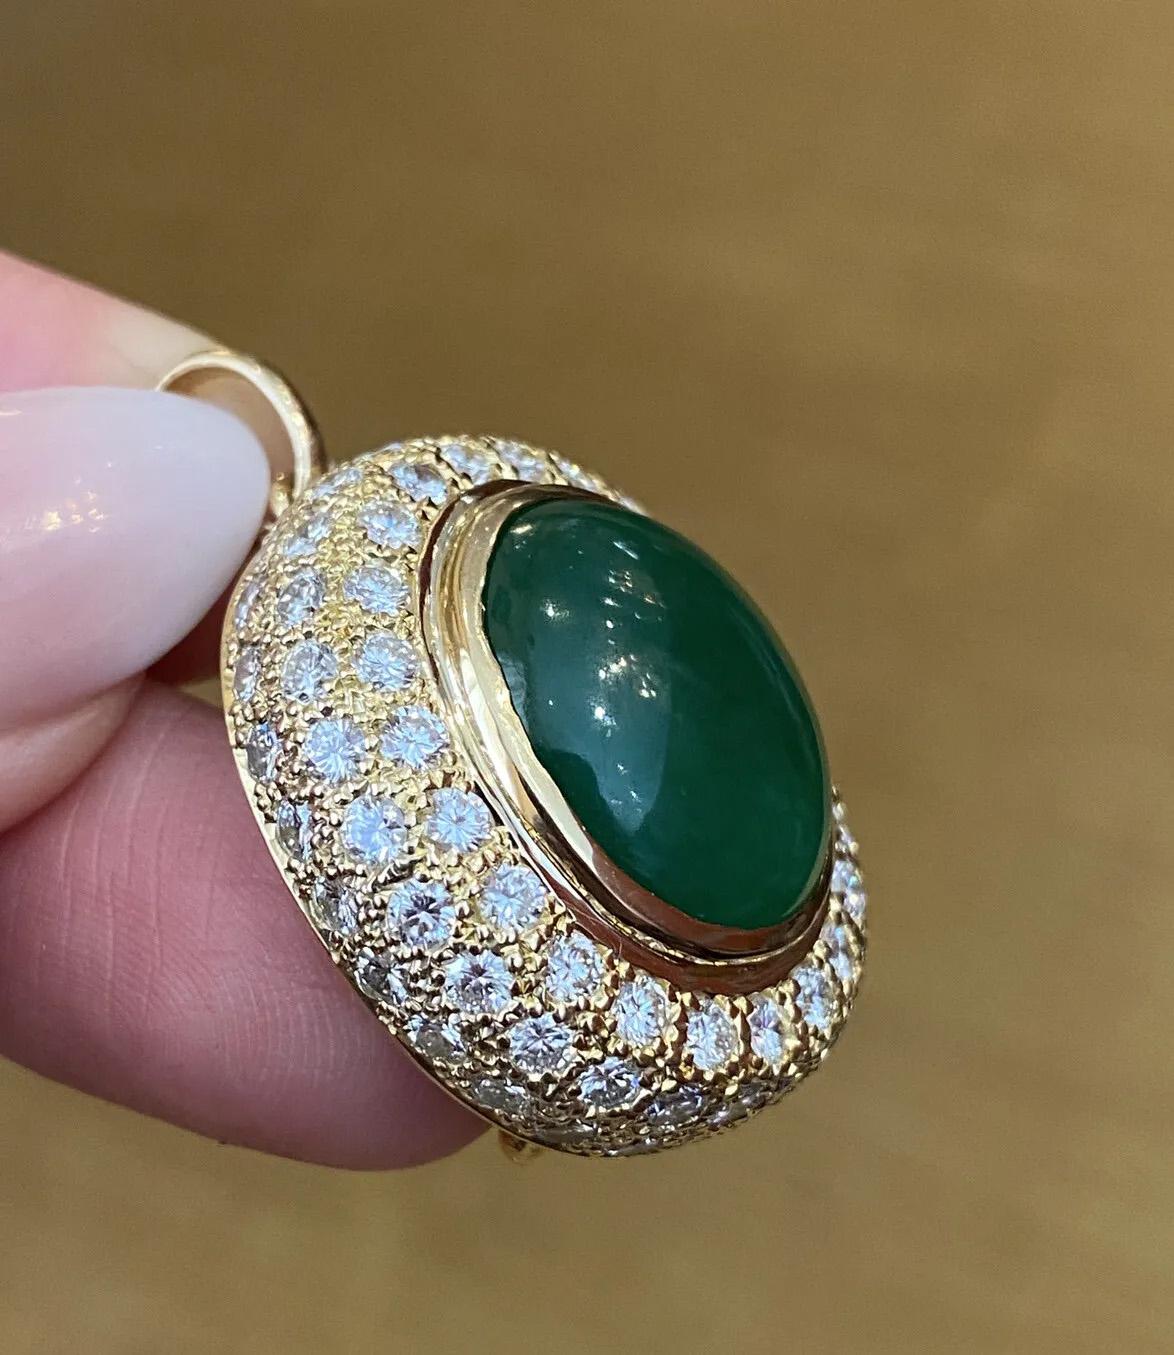 GIA Untreated Jadeite Jade Cabochon & Diamond Pendant in 18k Yellow Gold

Jadeite Jade & Diamond Pendant features a natural 15.71 Carat Oval Jade Cabochon surrounded by 4.10 Carats of Round Brilliant Diamonds Pavè set in 18k Yellow Gold.

The